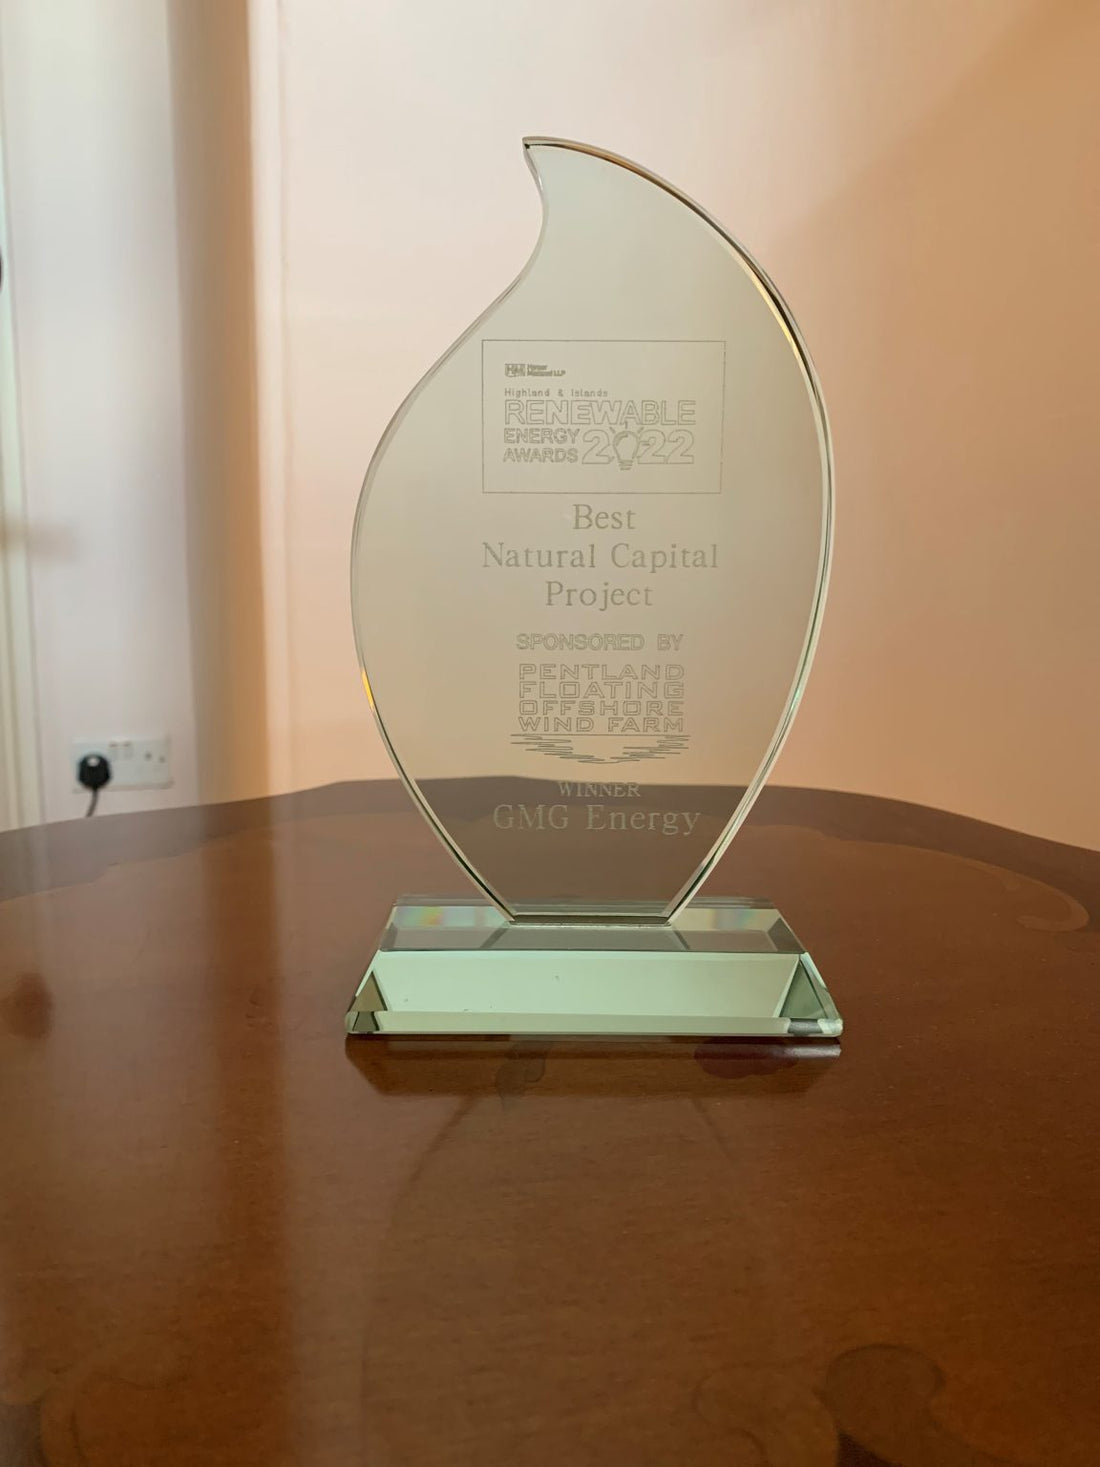 GMG Energy wins best natural capital project